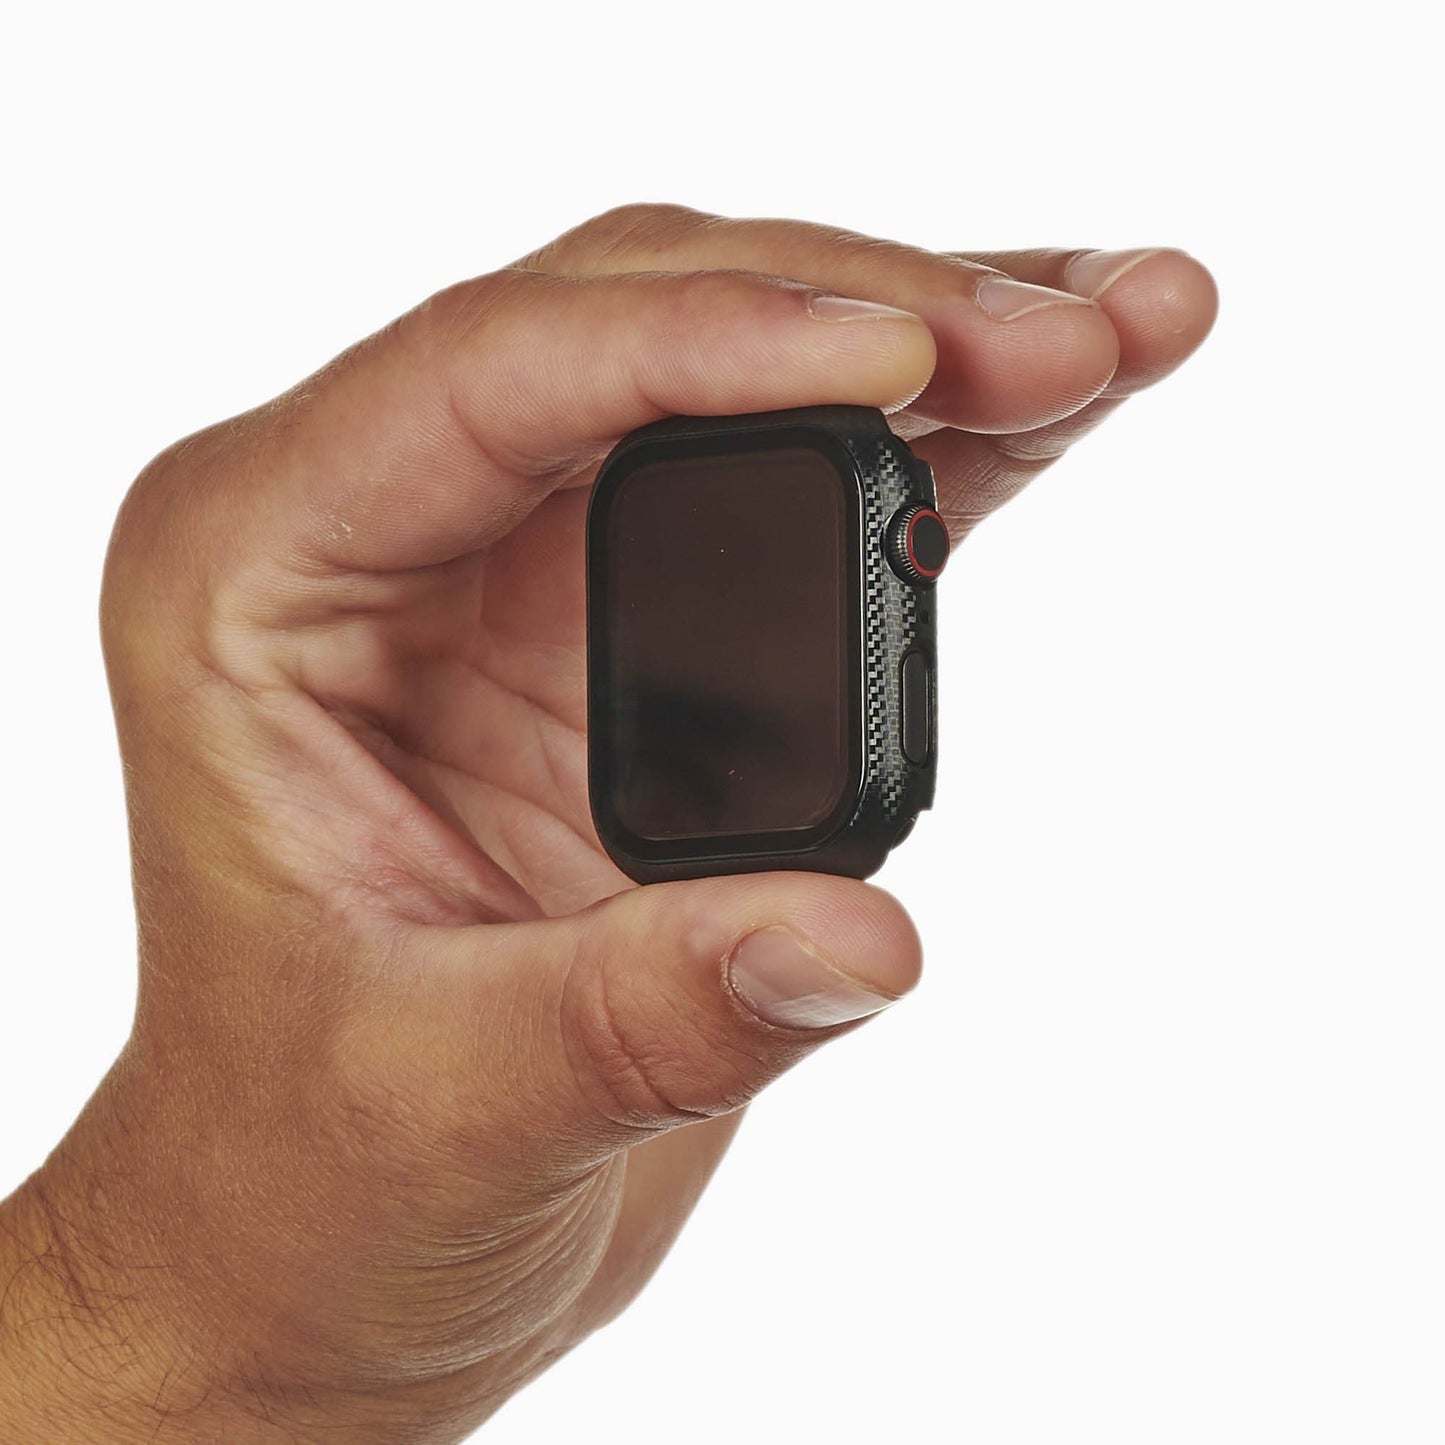 Carbon Fiber Case Protector for Apple Watch